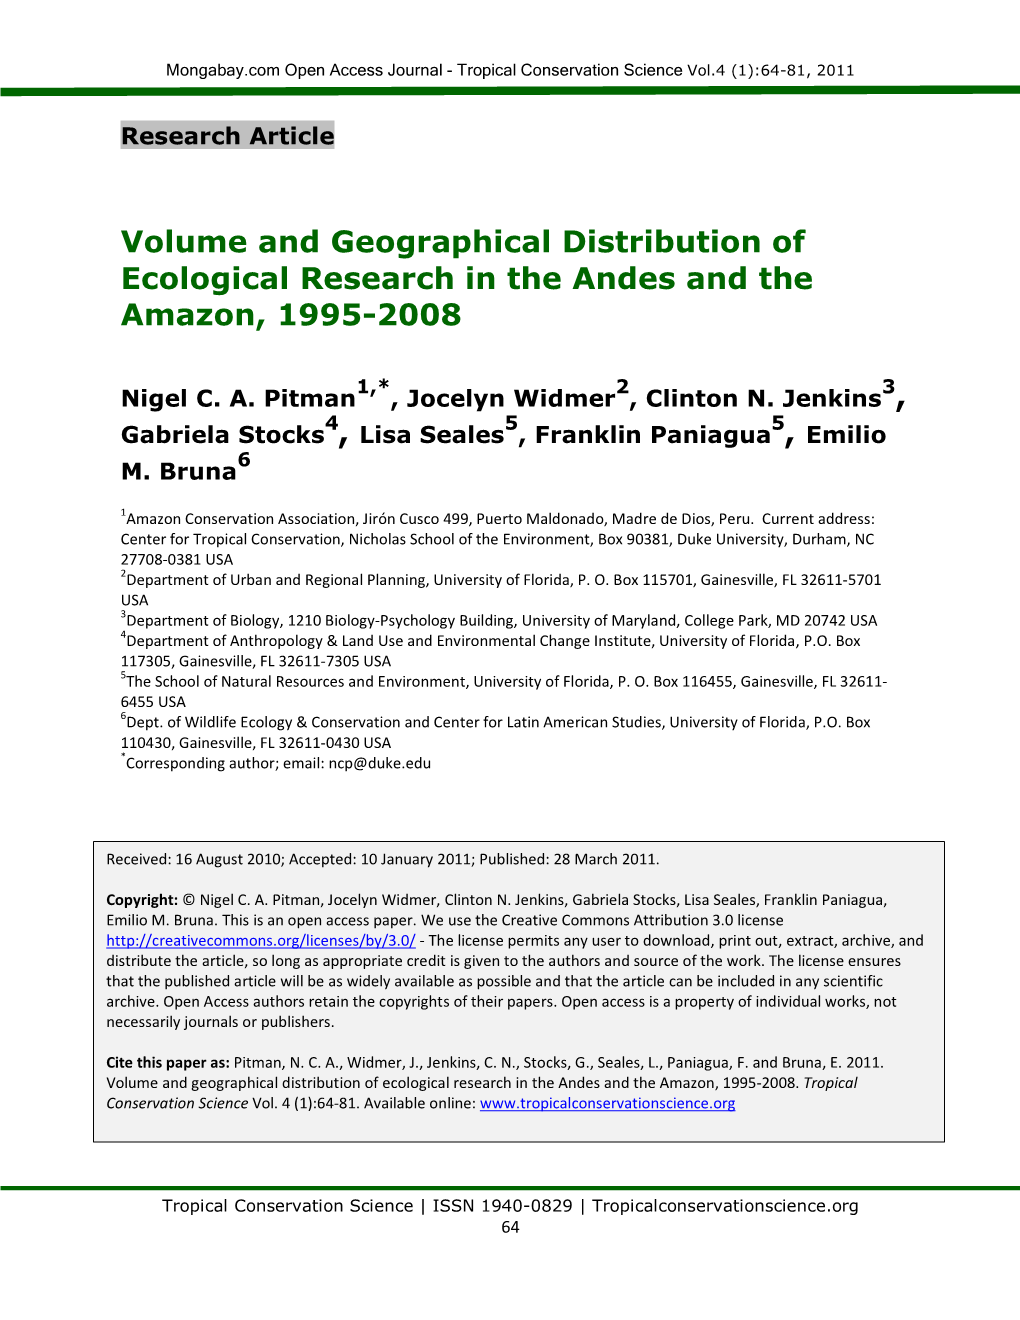 Volume and Geographical Distribution of Ecological Research in the Andes and the Amazon, 1995-2008